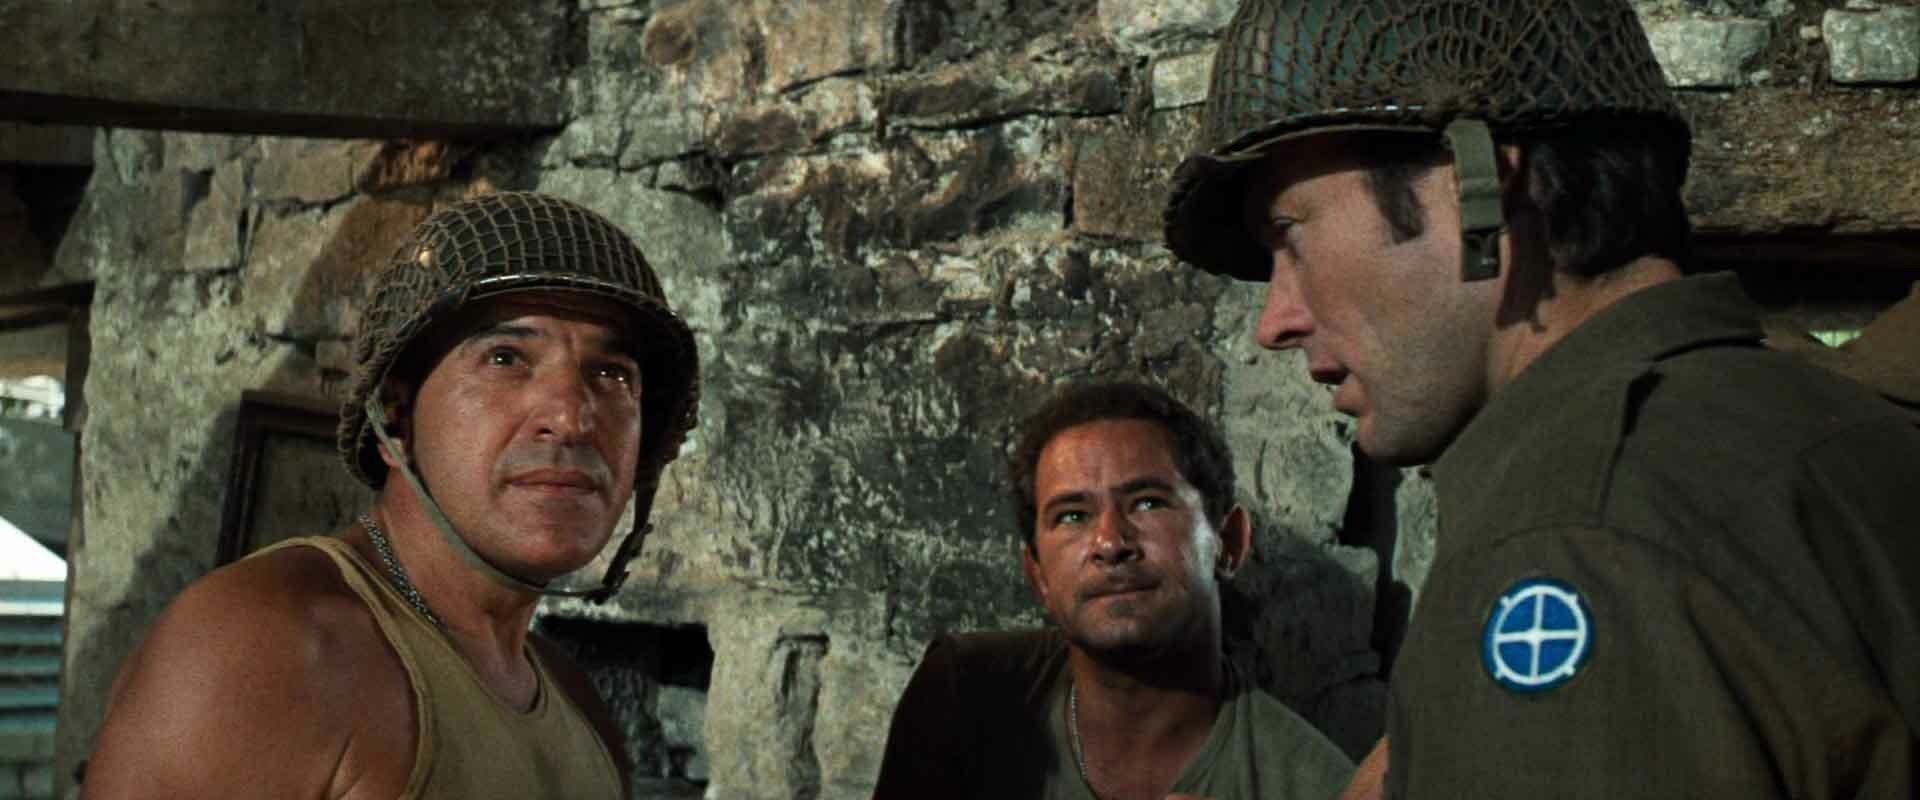 1920x800 Kelly's Heroes Wallpaper Background Image. 